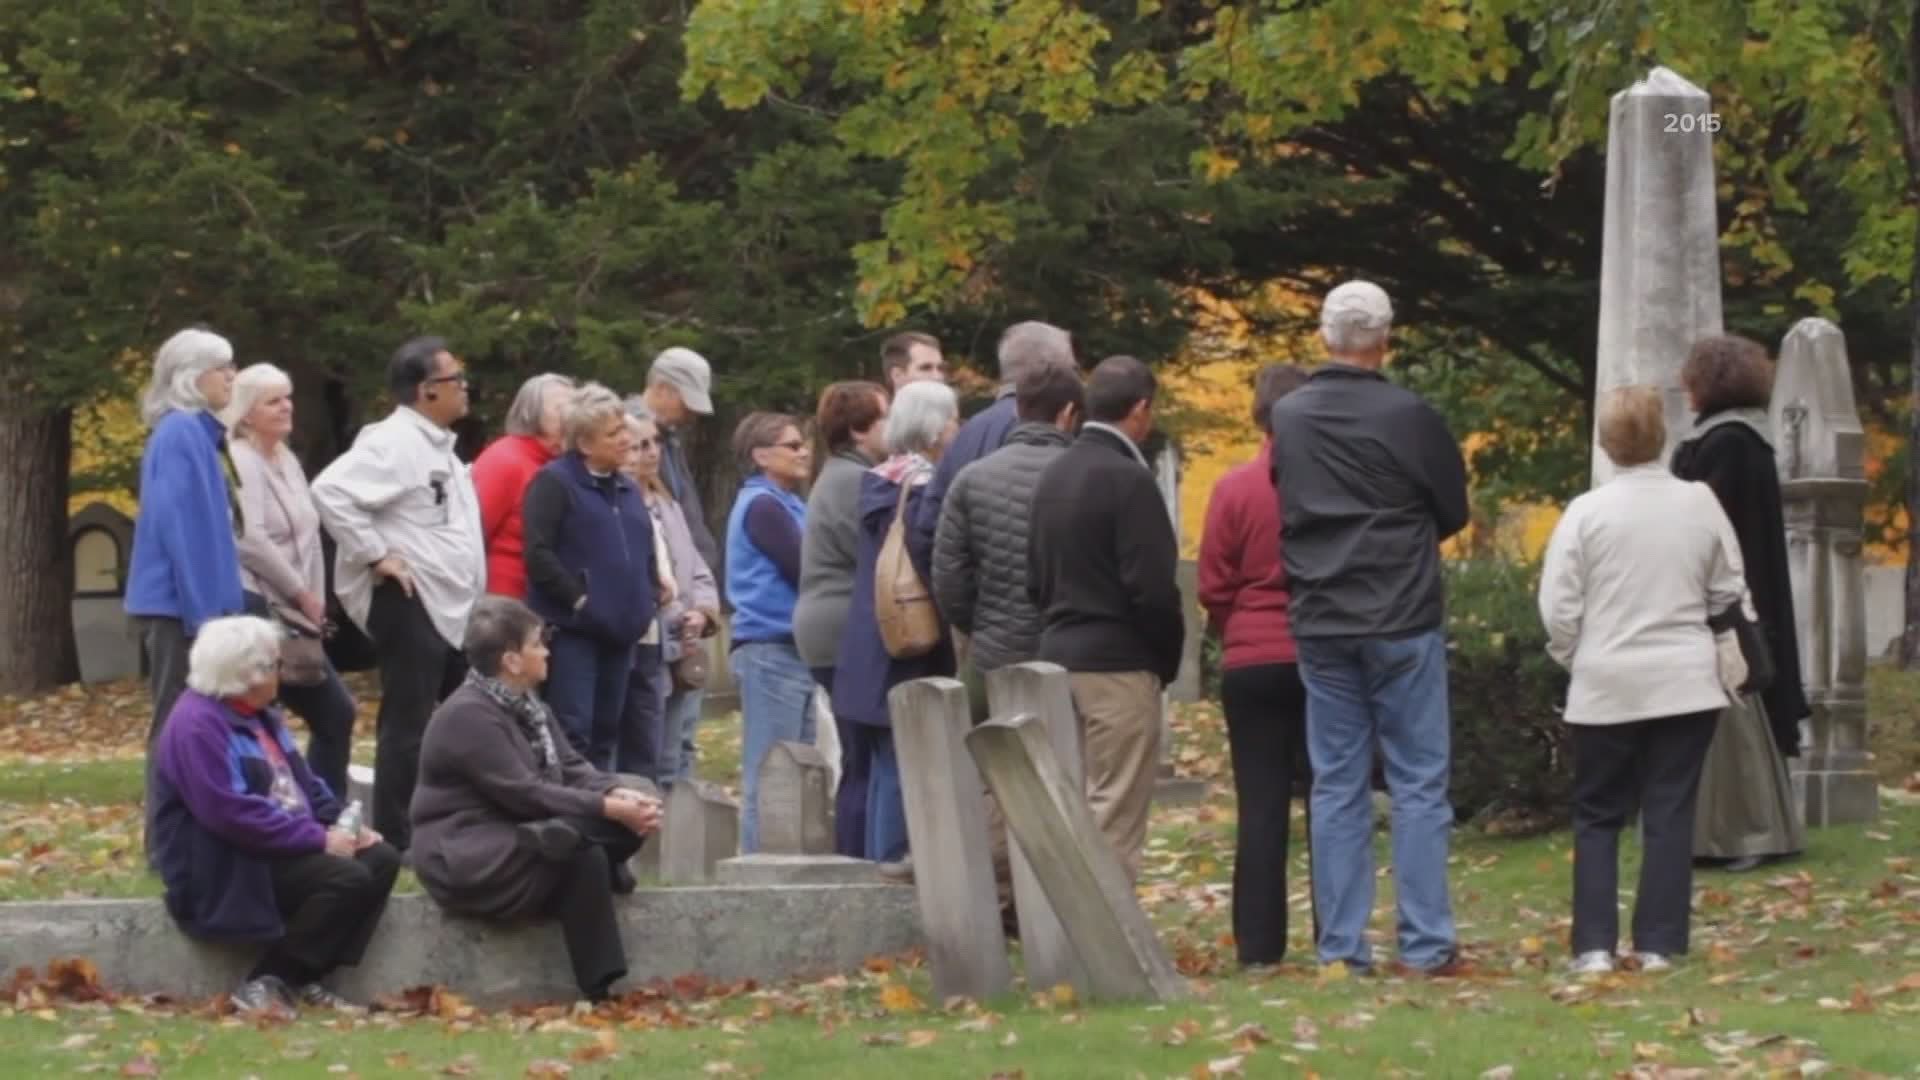 Cemeteries in Maine hold a lot of history; this time of year, that history comes to life through actor portrayals. Now you can watch from home.